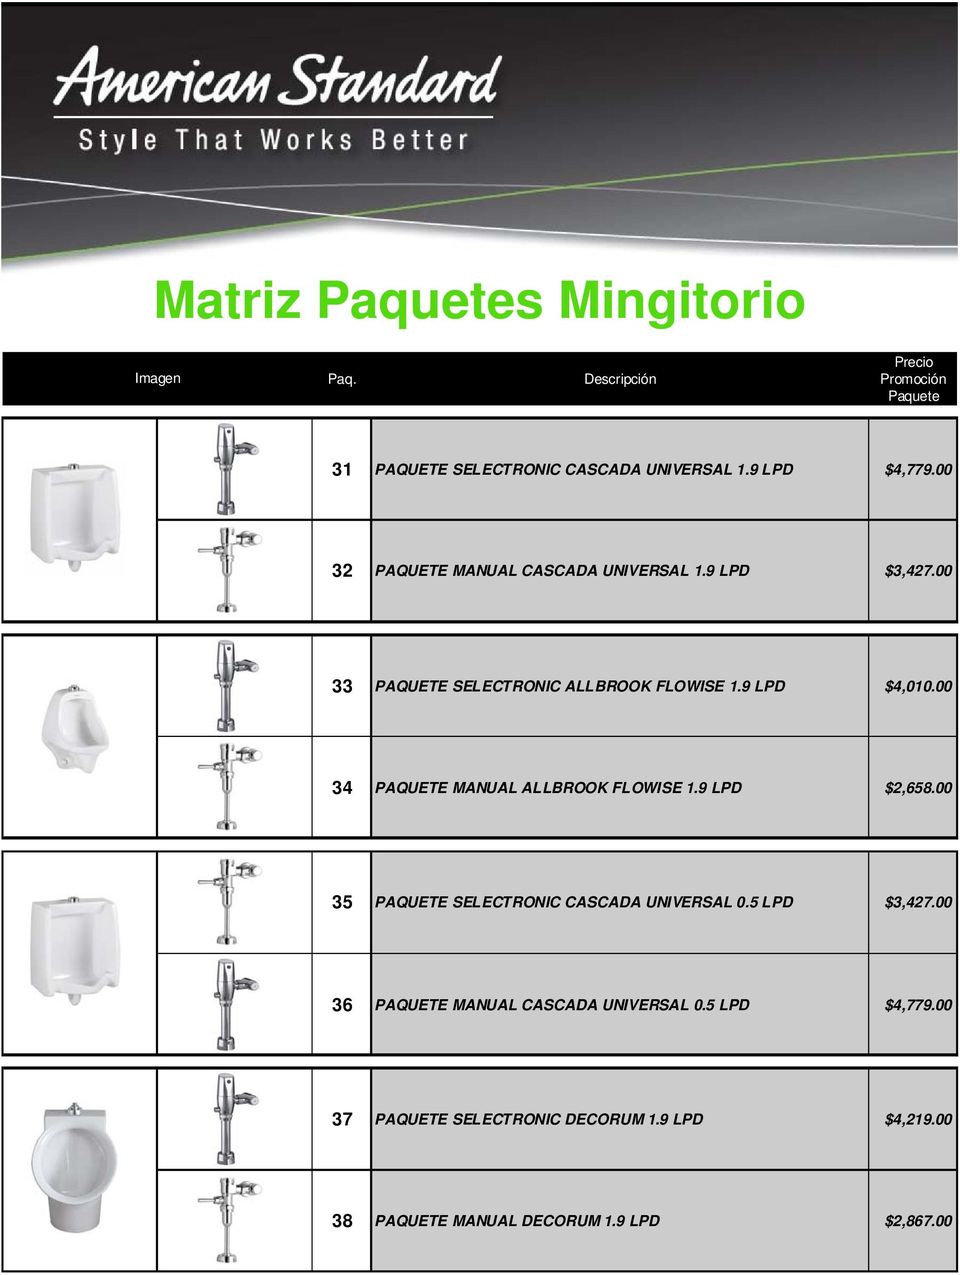 00 34 PAQUETE MANUAL ALLBROOK FLOWISE 1.9 LPD $2,658.00 35 PAQUETE SELECTRONIC CASCADA UNIVERSAL 0.5 LPD $3,427.